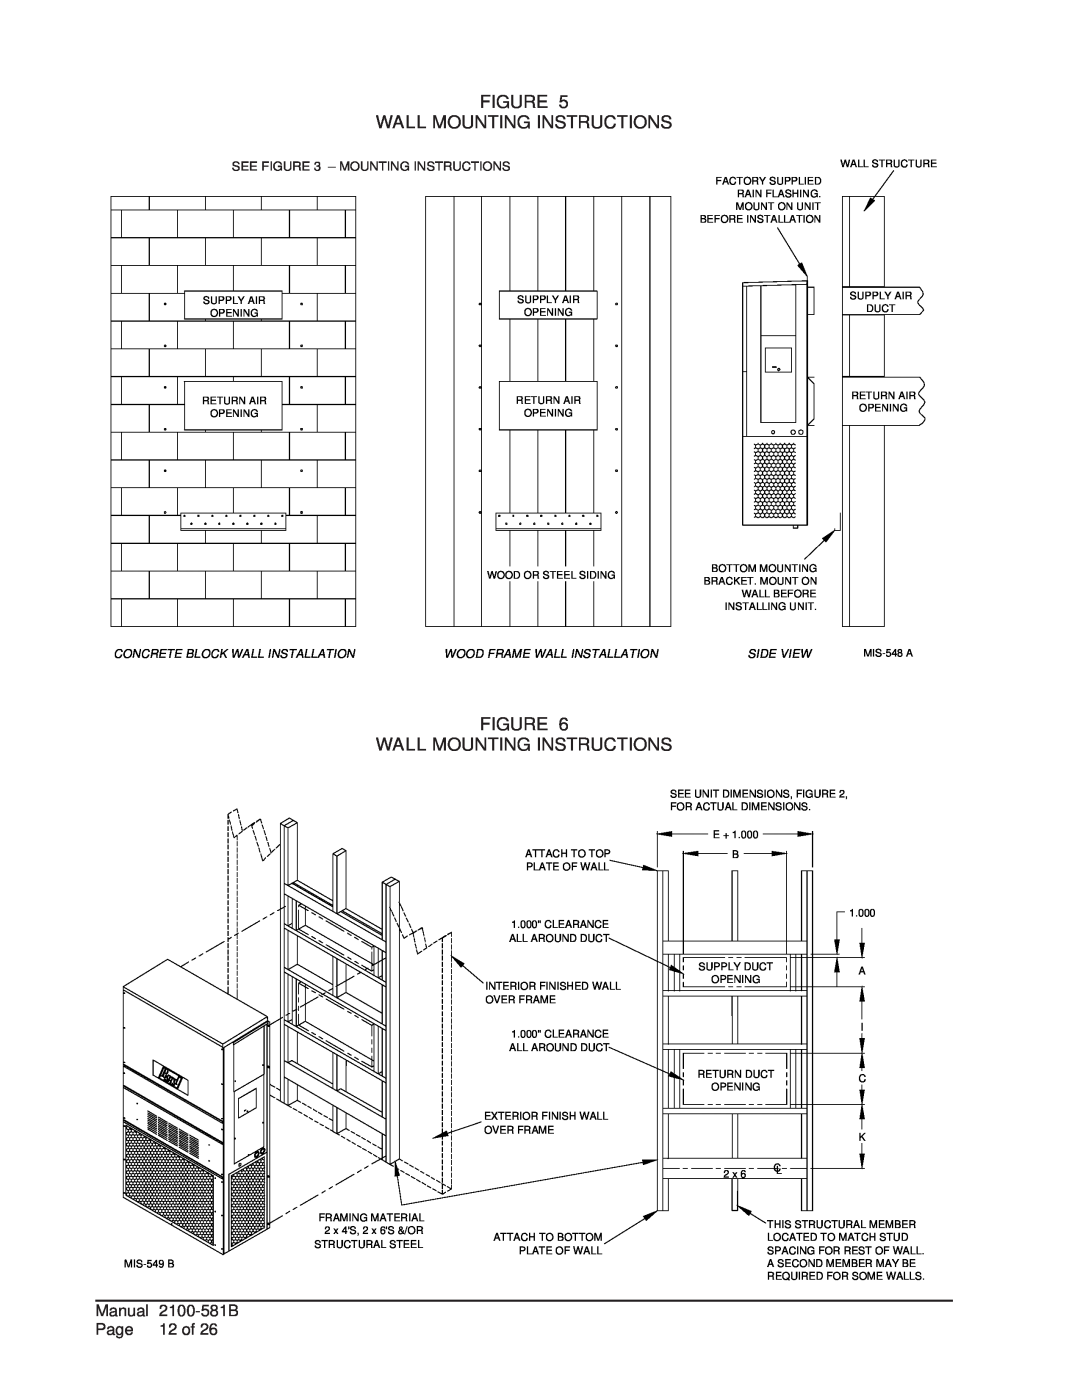 Bard w17a2 Figure Wall Mounting Instructions, Concrete Block Wall Installation, Side View, Wood Frame Wall Installation 